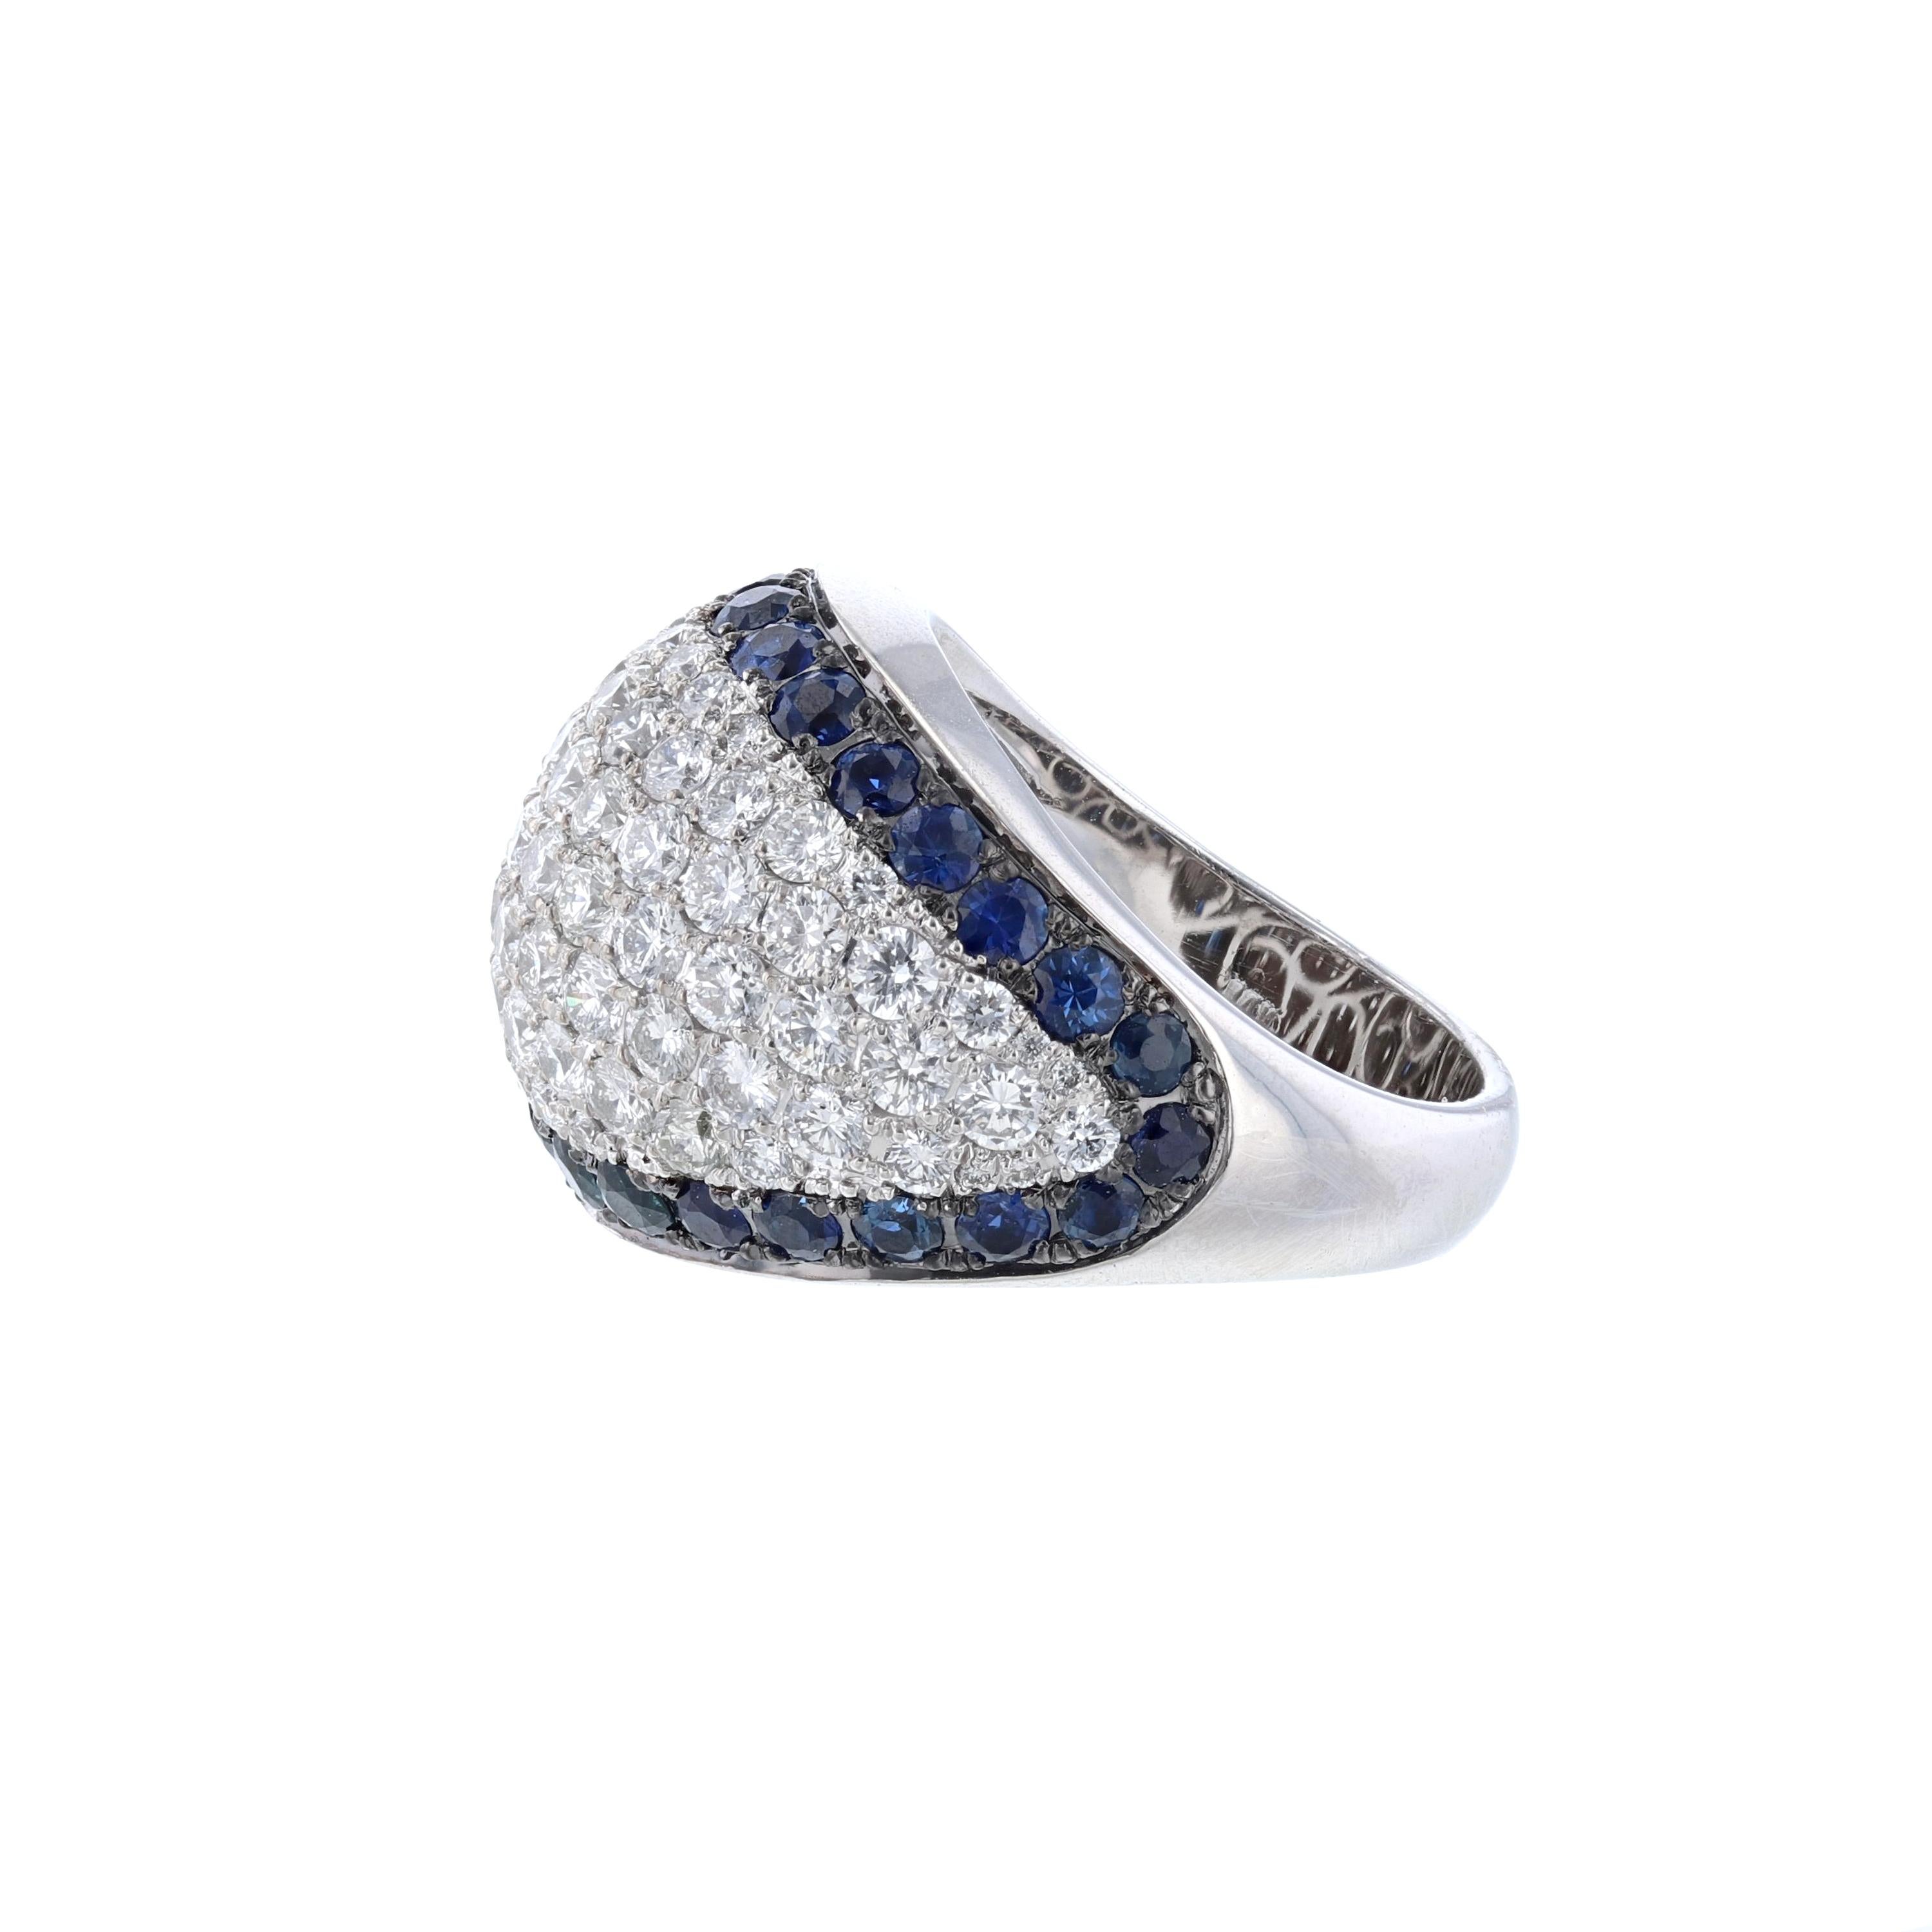 This ring is made in 14K white gold and features 32 round cut blue sapphires weighing 2.16 carats. Also includes 88 round cut diamonds weighing 2.76 carats. With a color grade (H) and clarity grade (SI2) All stones are prong set. with a  color grade